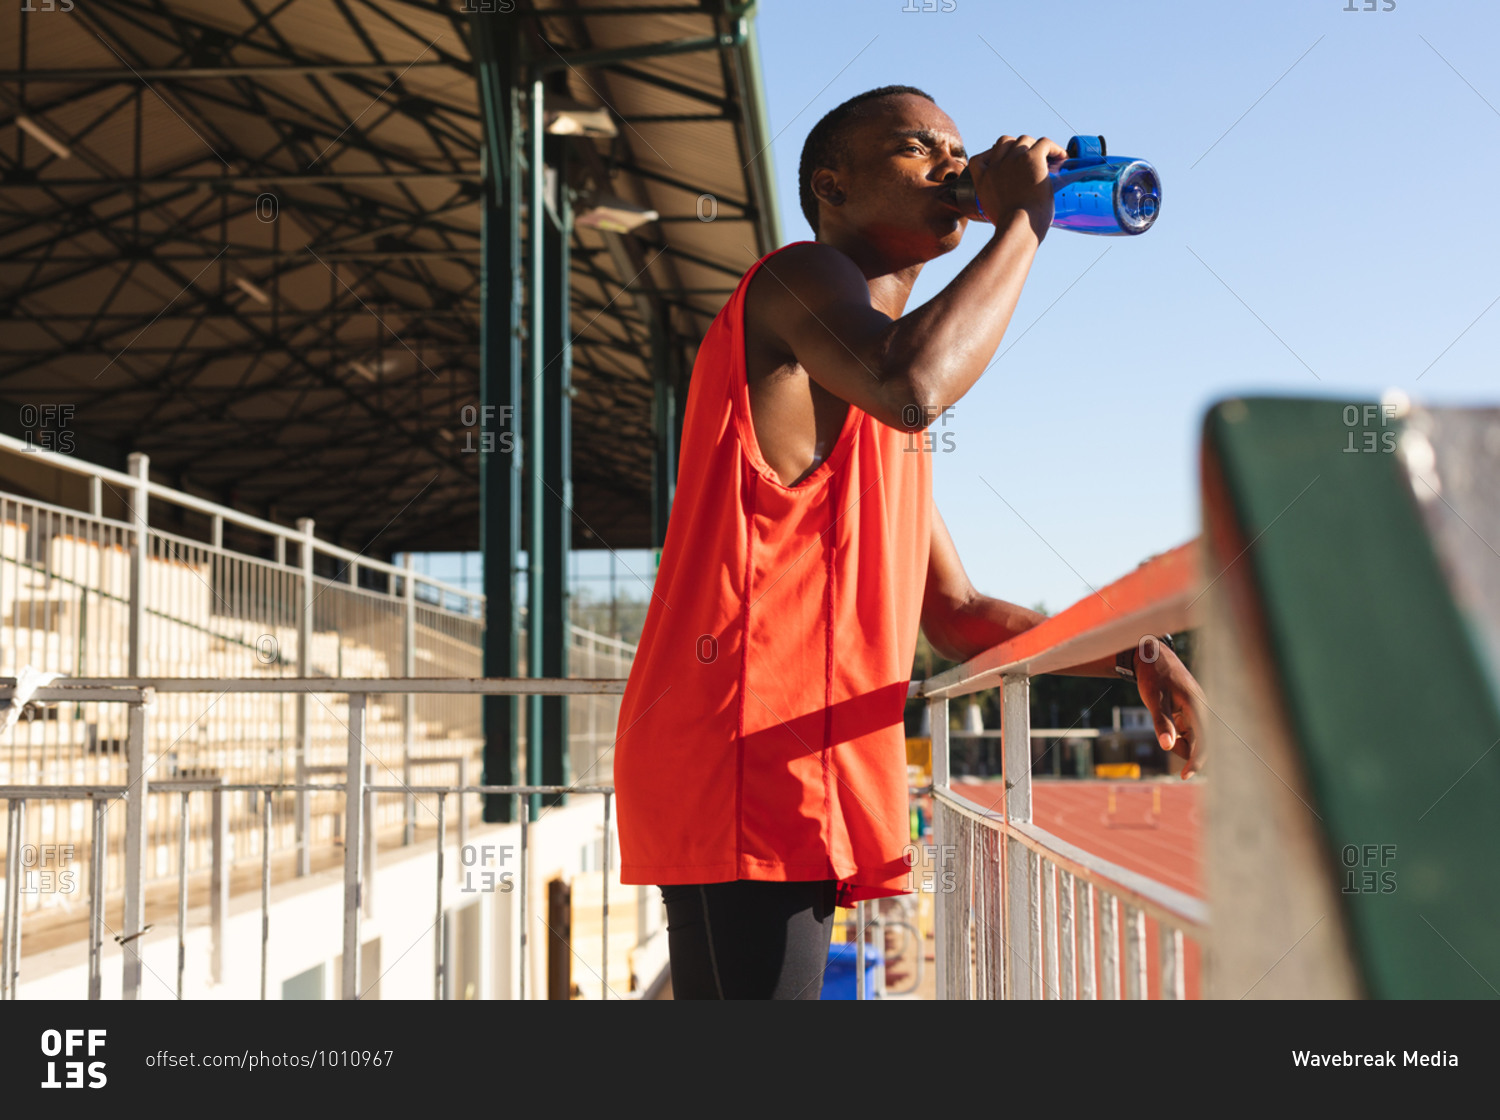 Fit, mixed race male athlete at an outdoor sports stadium, resting and drinking from water bottle standing in the stands. Athletics sport training.